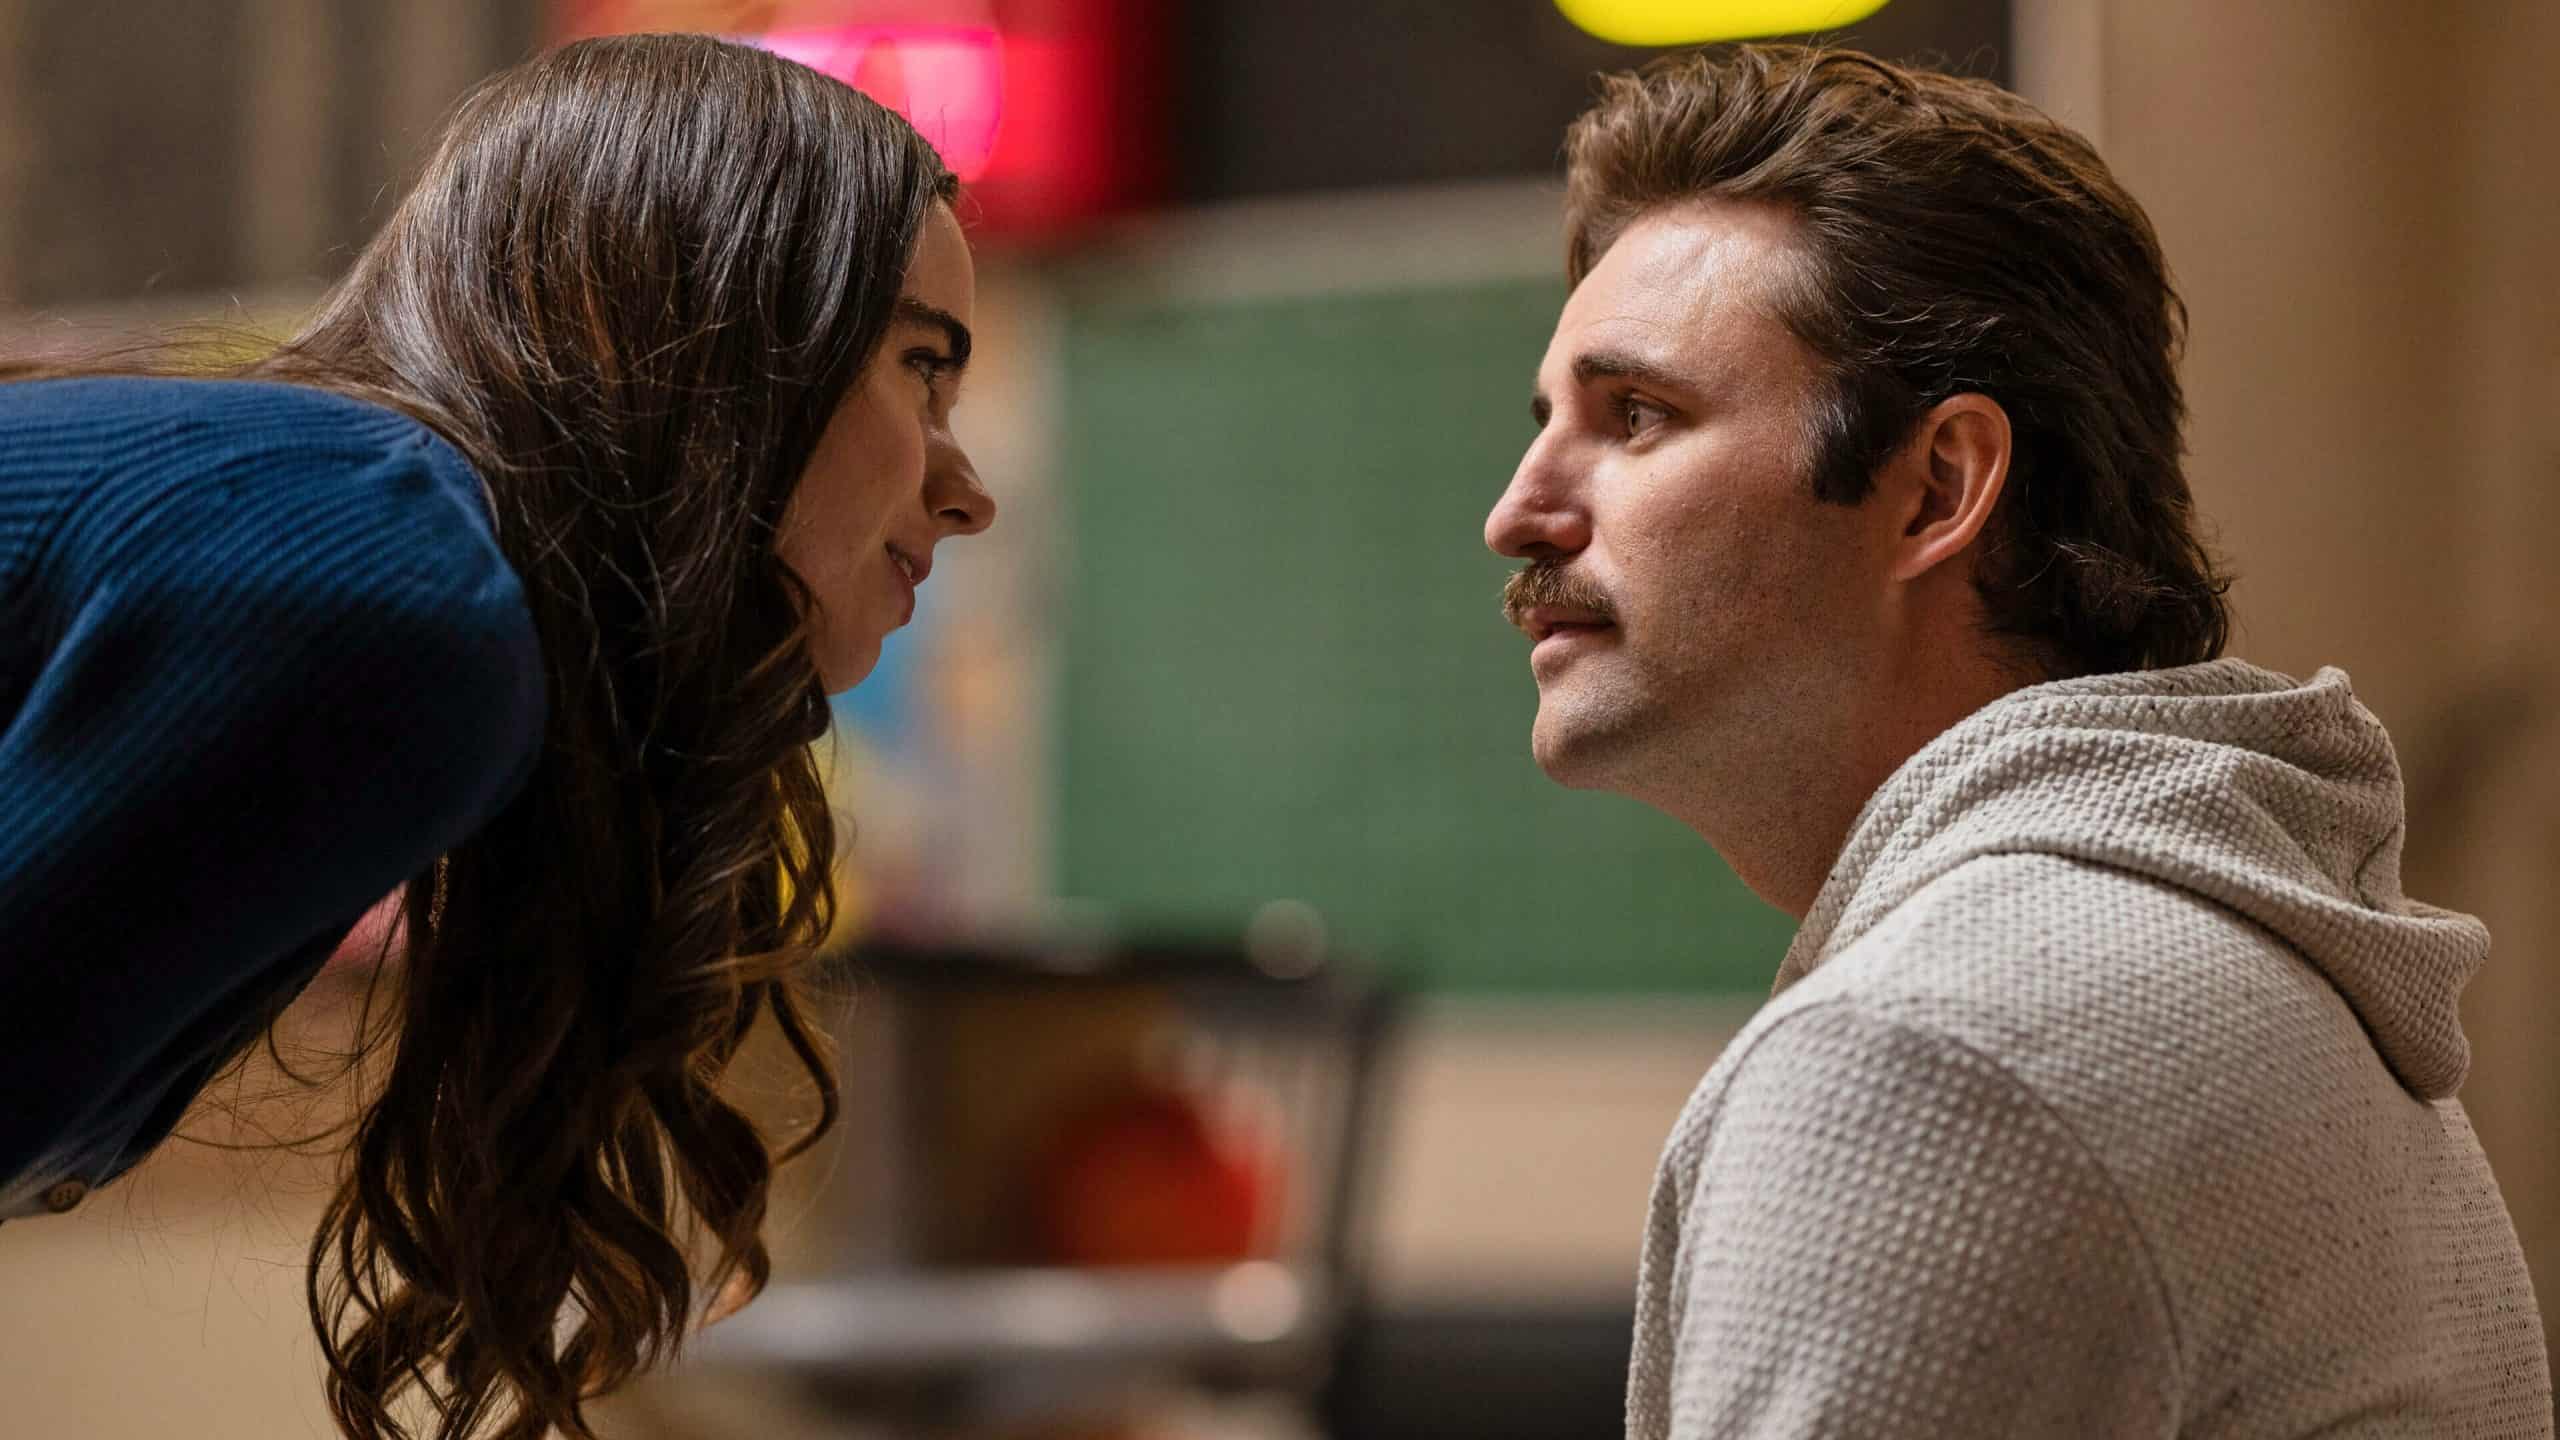 A teenage girl leans down to speak to a man with a mustache in this image from Showtime.